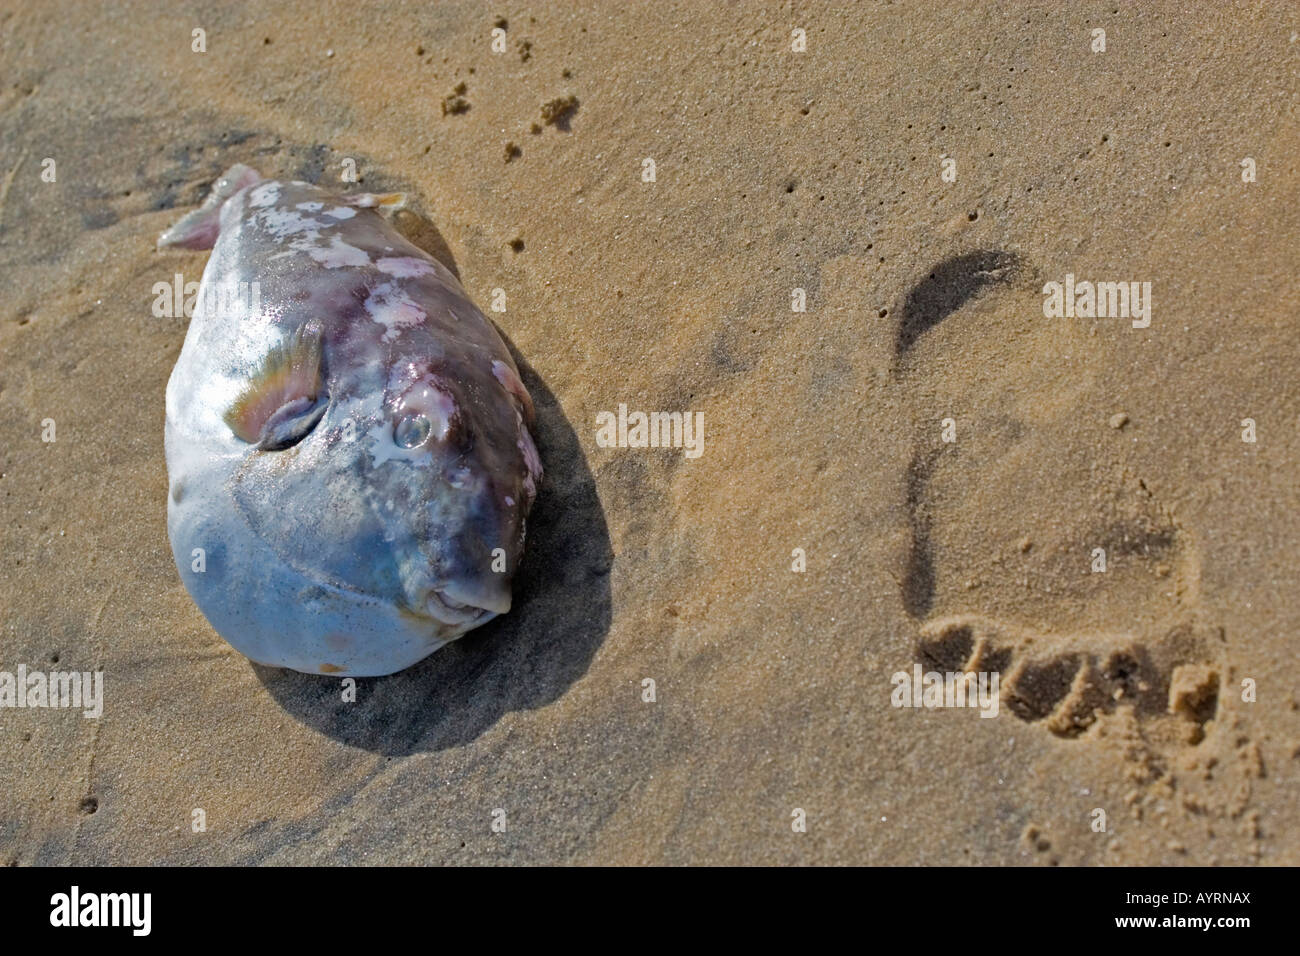 Footprint next to a stranded blowfish on the beach Stock Photo